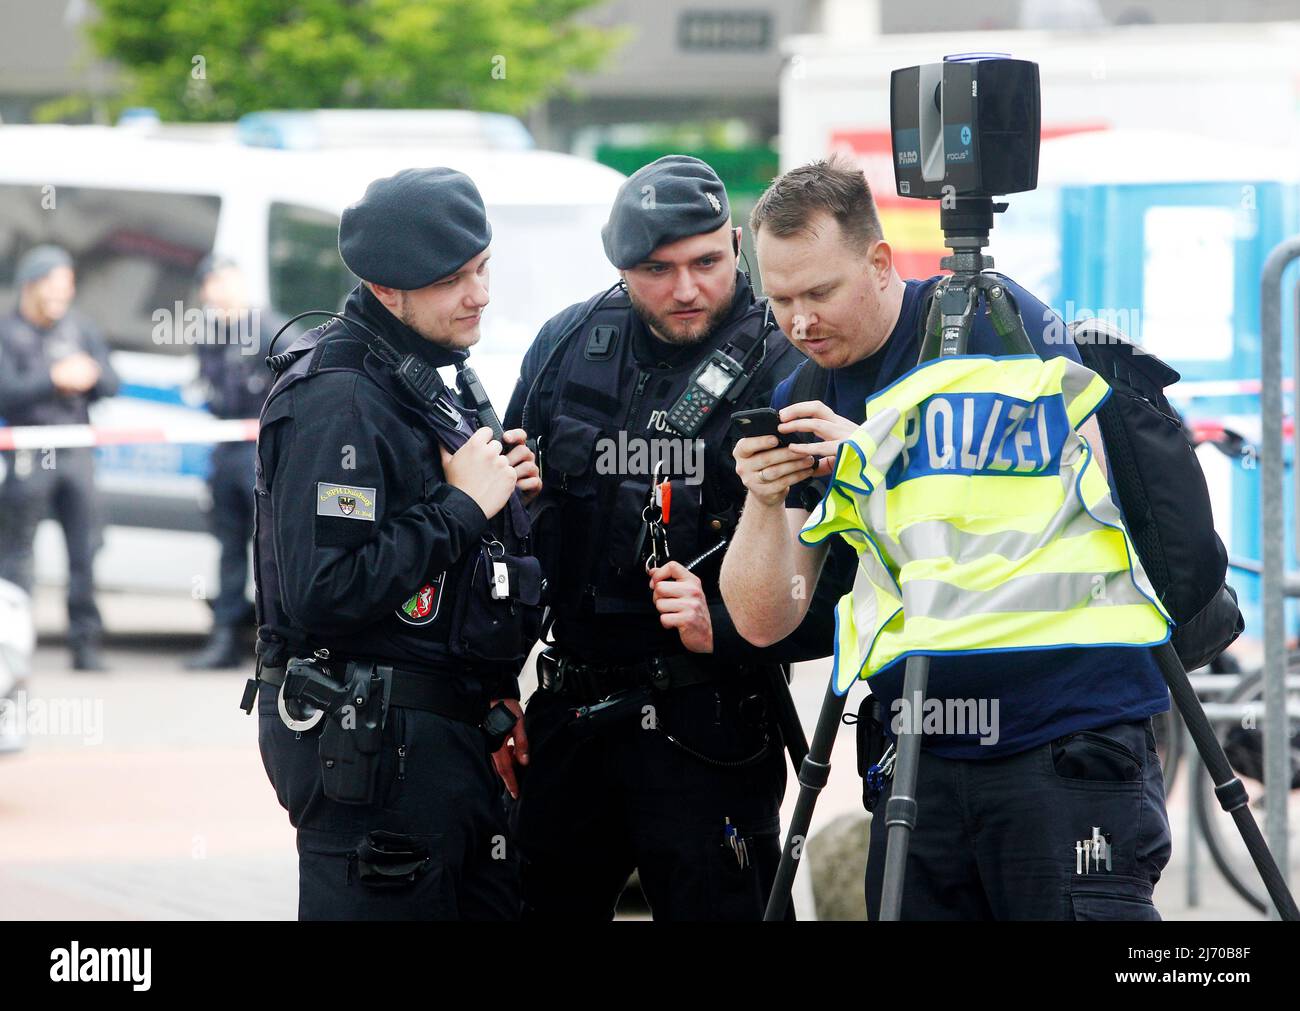 05 May 2022, North Rhine-Westphalia, Duisburg: Police officers examine the scene on the market square with a camera. Four people were injured in open street shooting on Wednesday (04.05.2022). 15 people were temporarily taken into custody, police and prosecutors announced on Thursday. A homicide squad has taken over the investigation. Photo: Roland Weihrauch/dpa Stock Photo